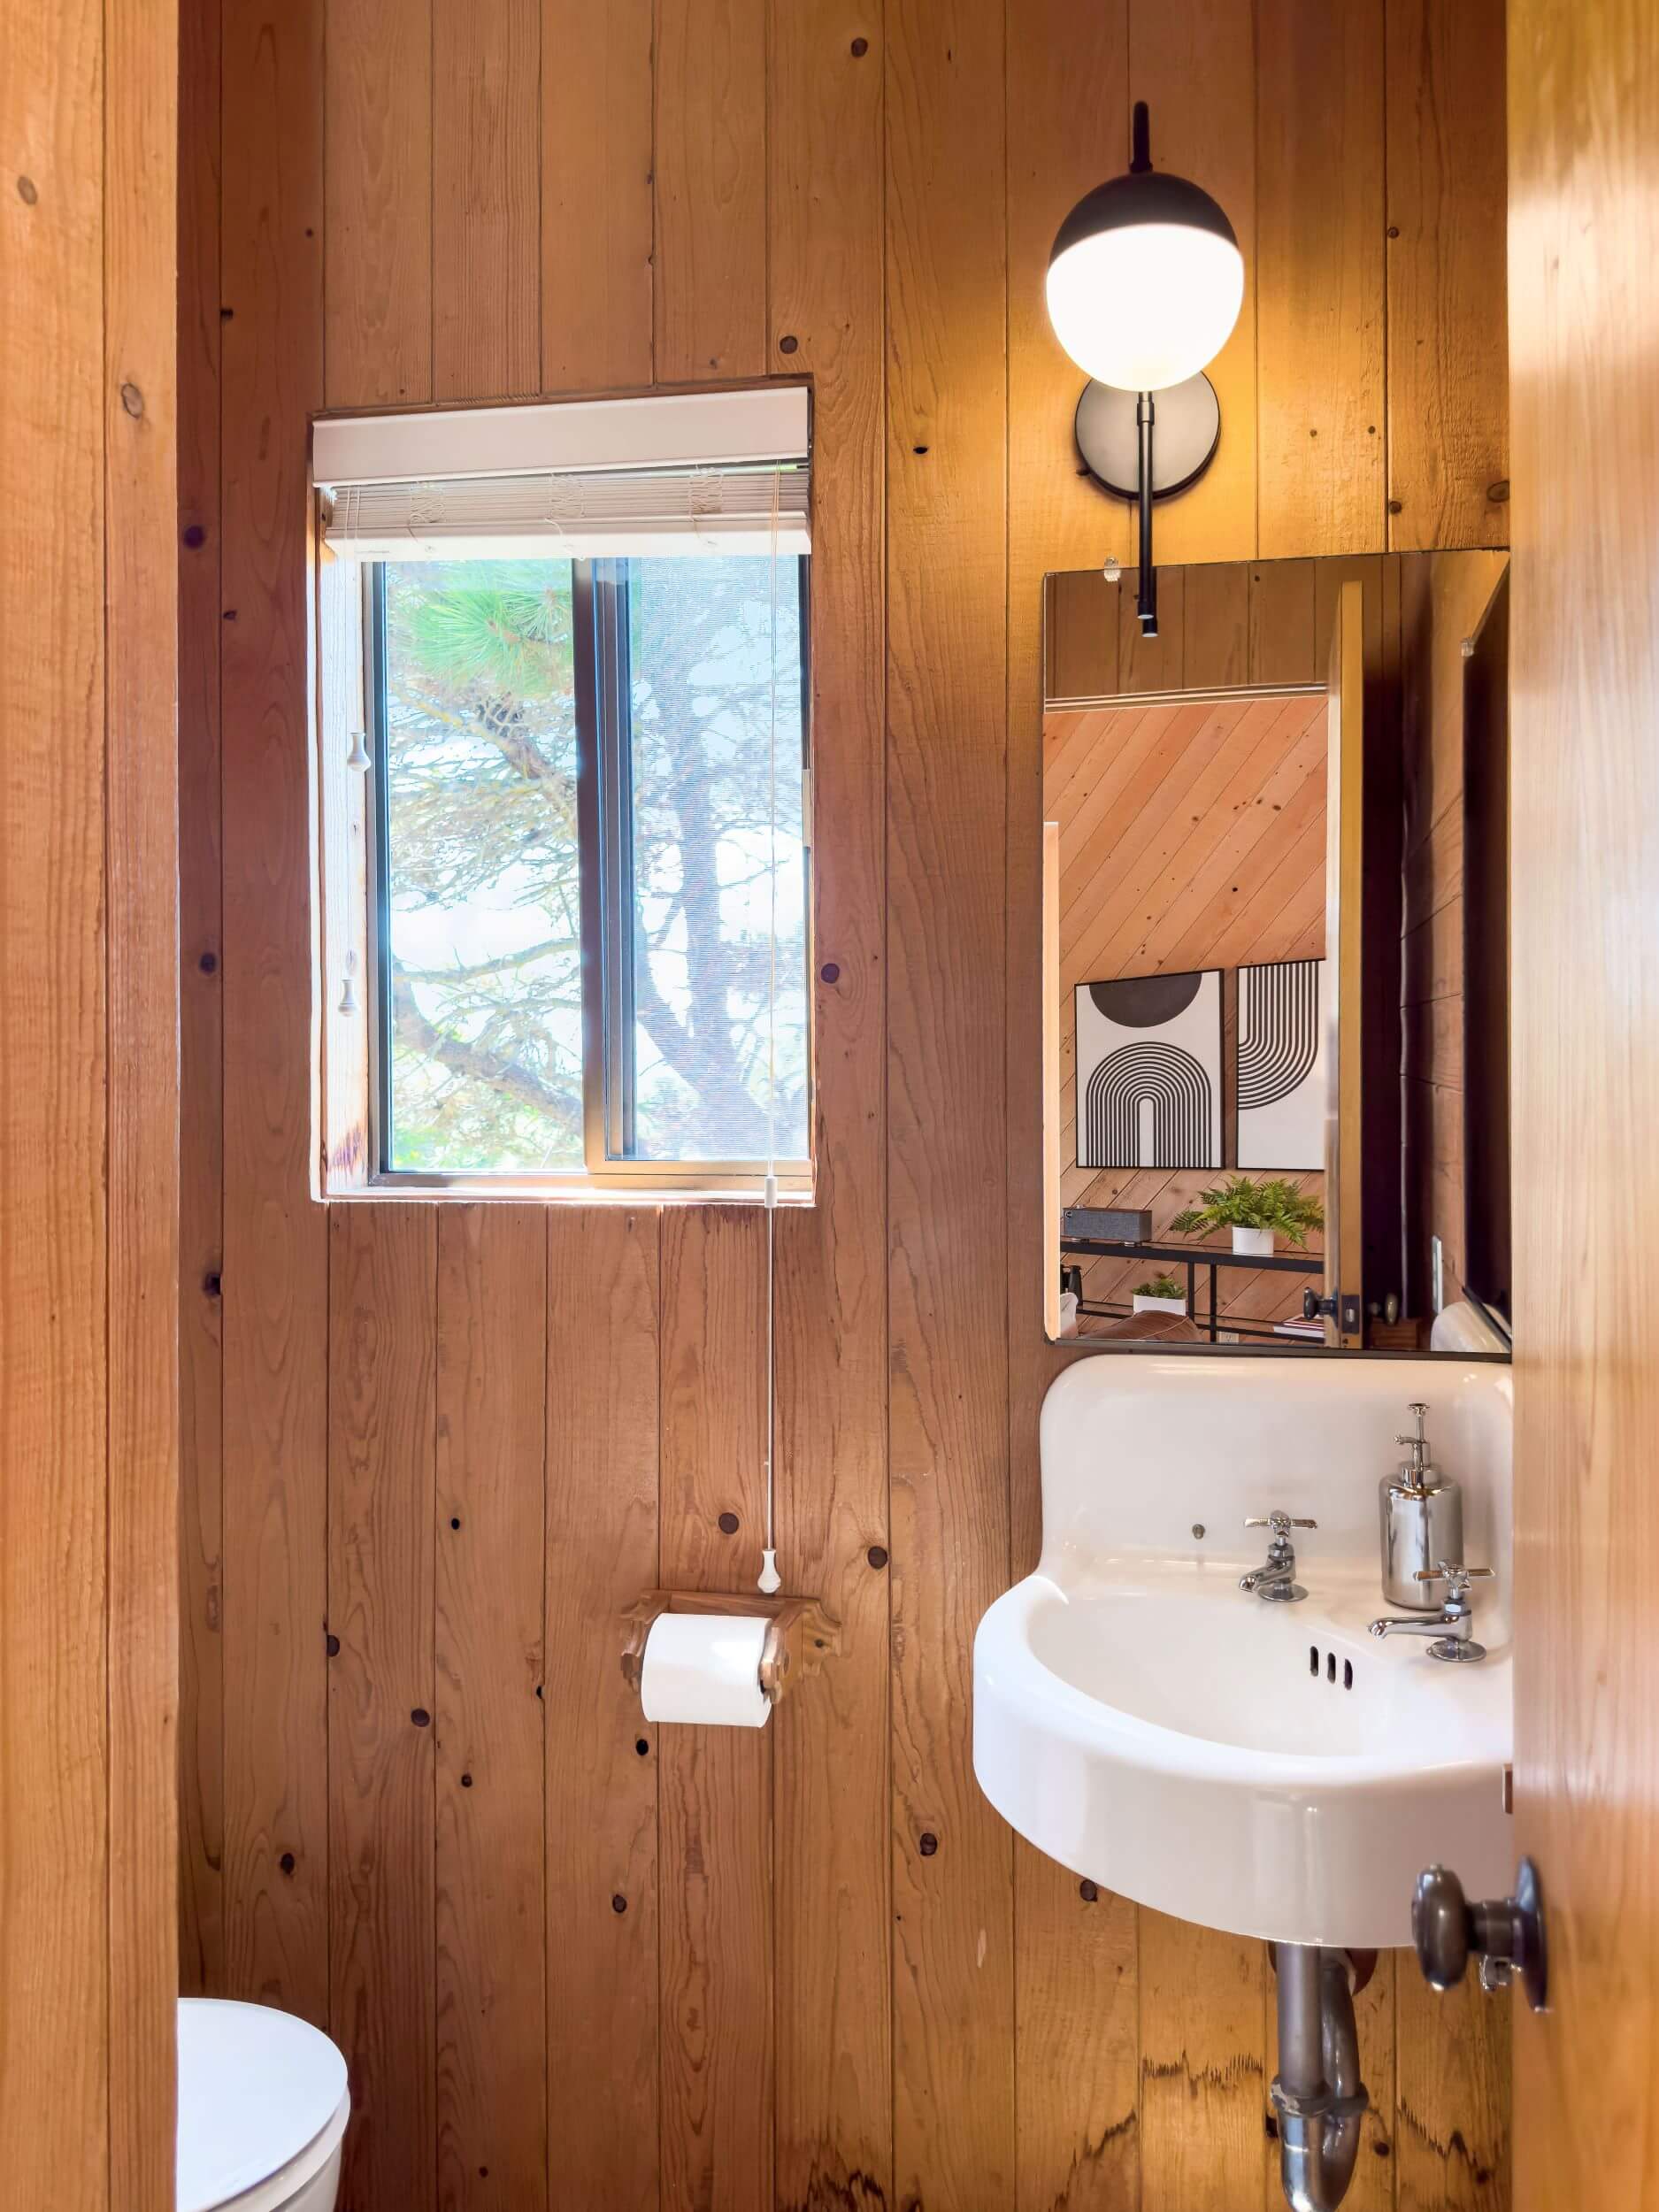 Sea Meadow: 1/2 bathroom with wood walls, small sink and small window.